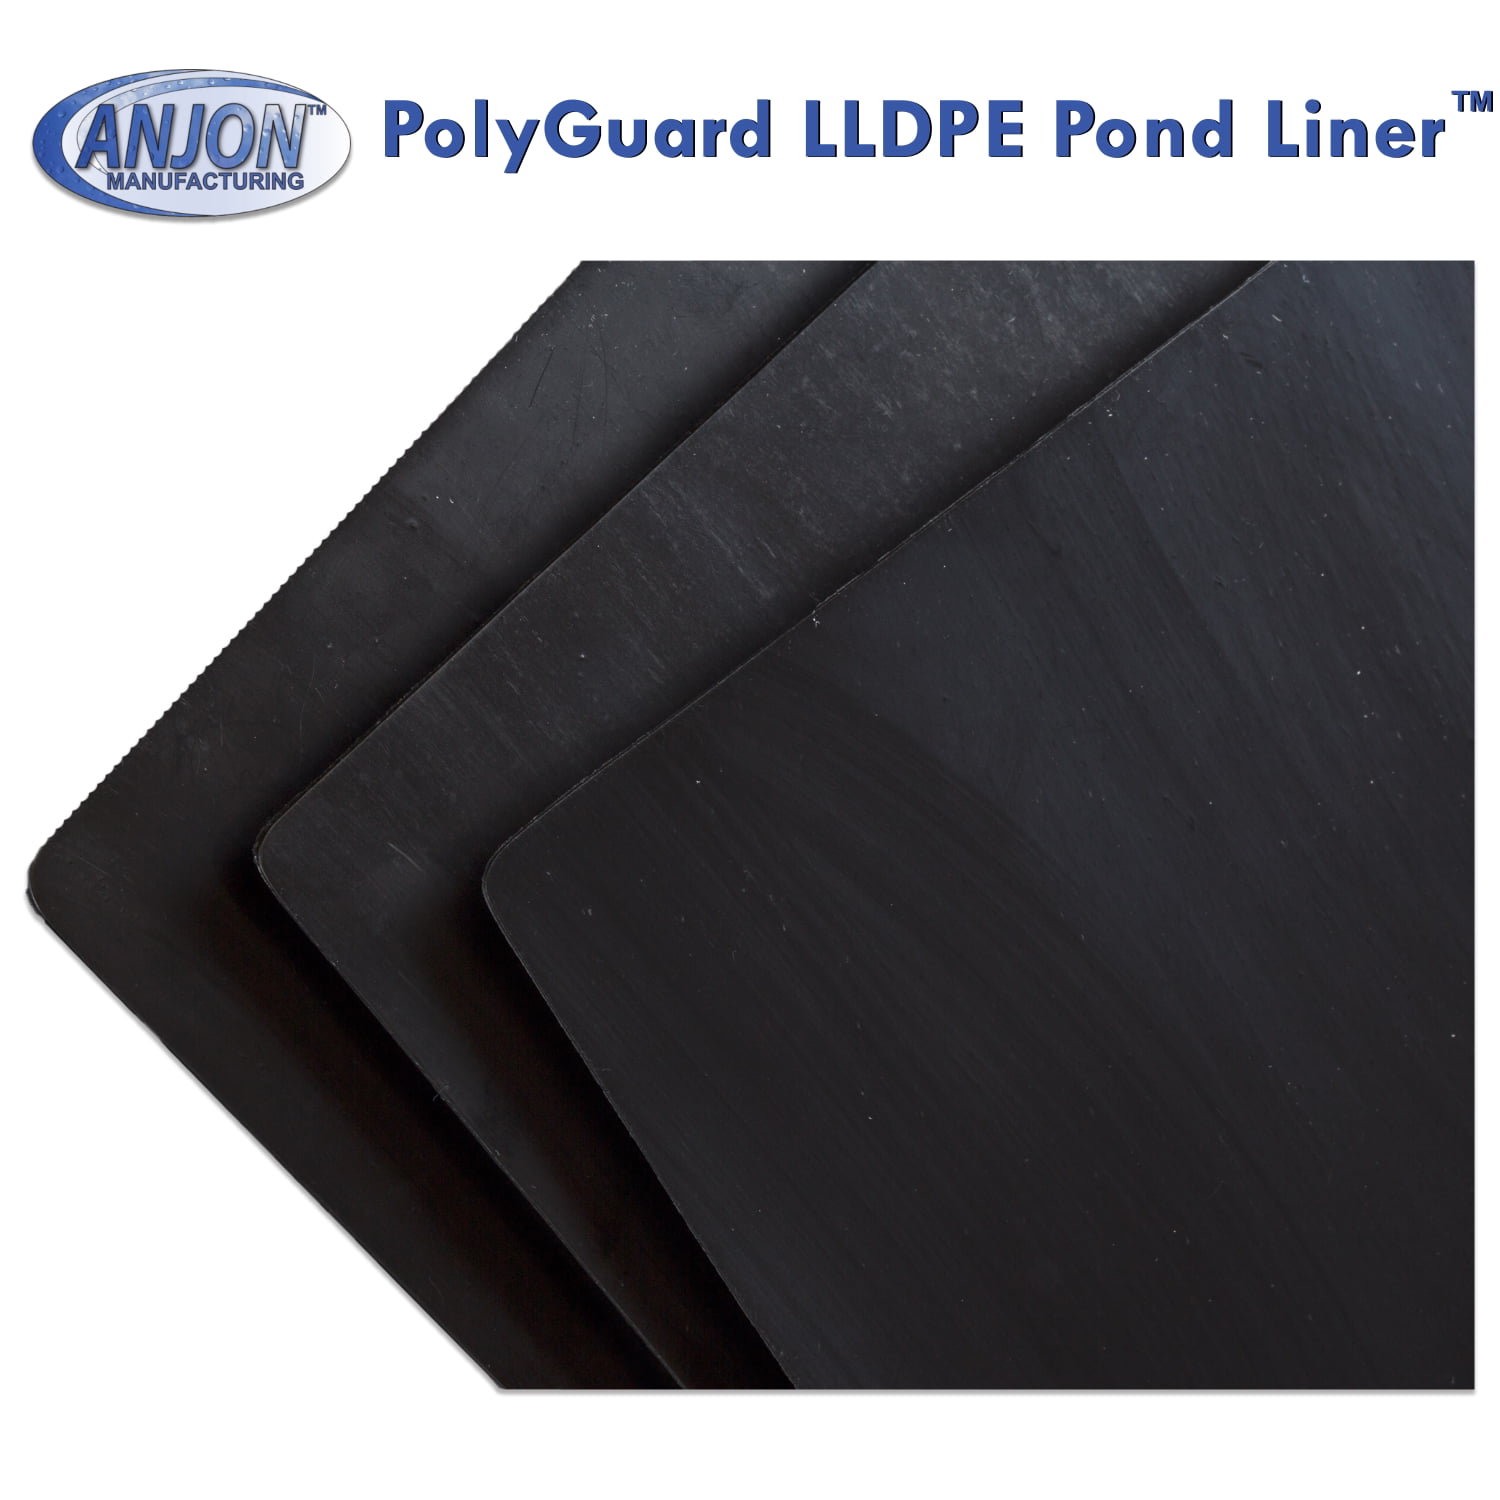 x 20 ft Details about   PolyGuard Pond Liners 15 ft 20-Mil PVC Liner 